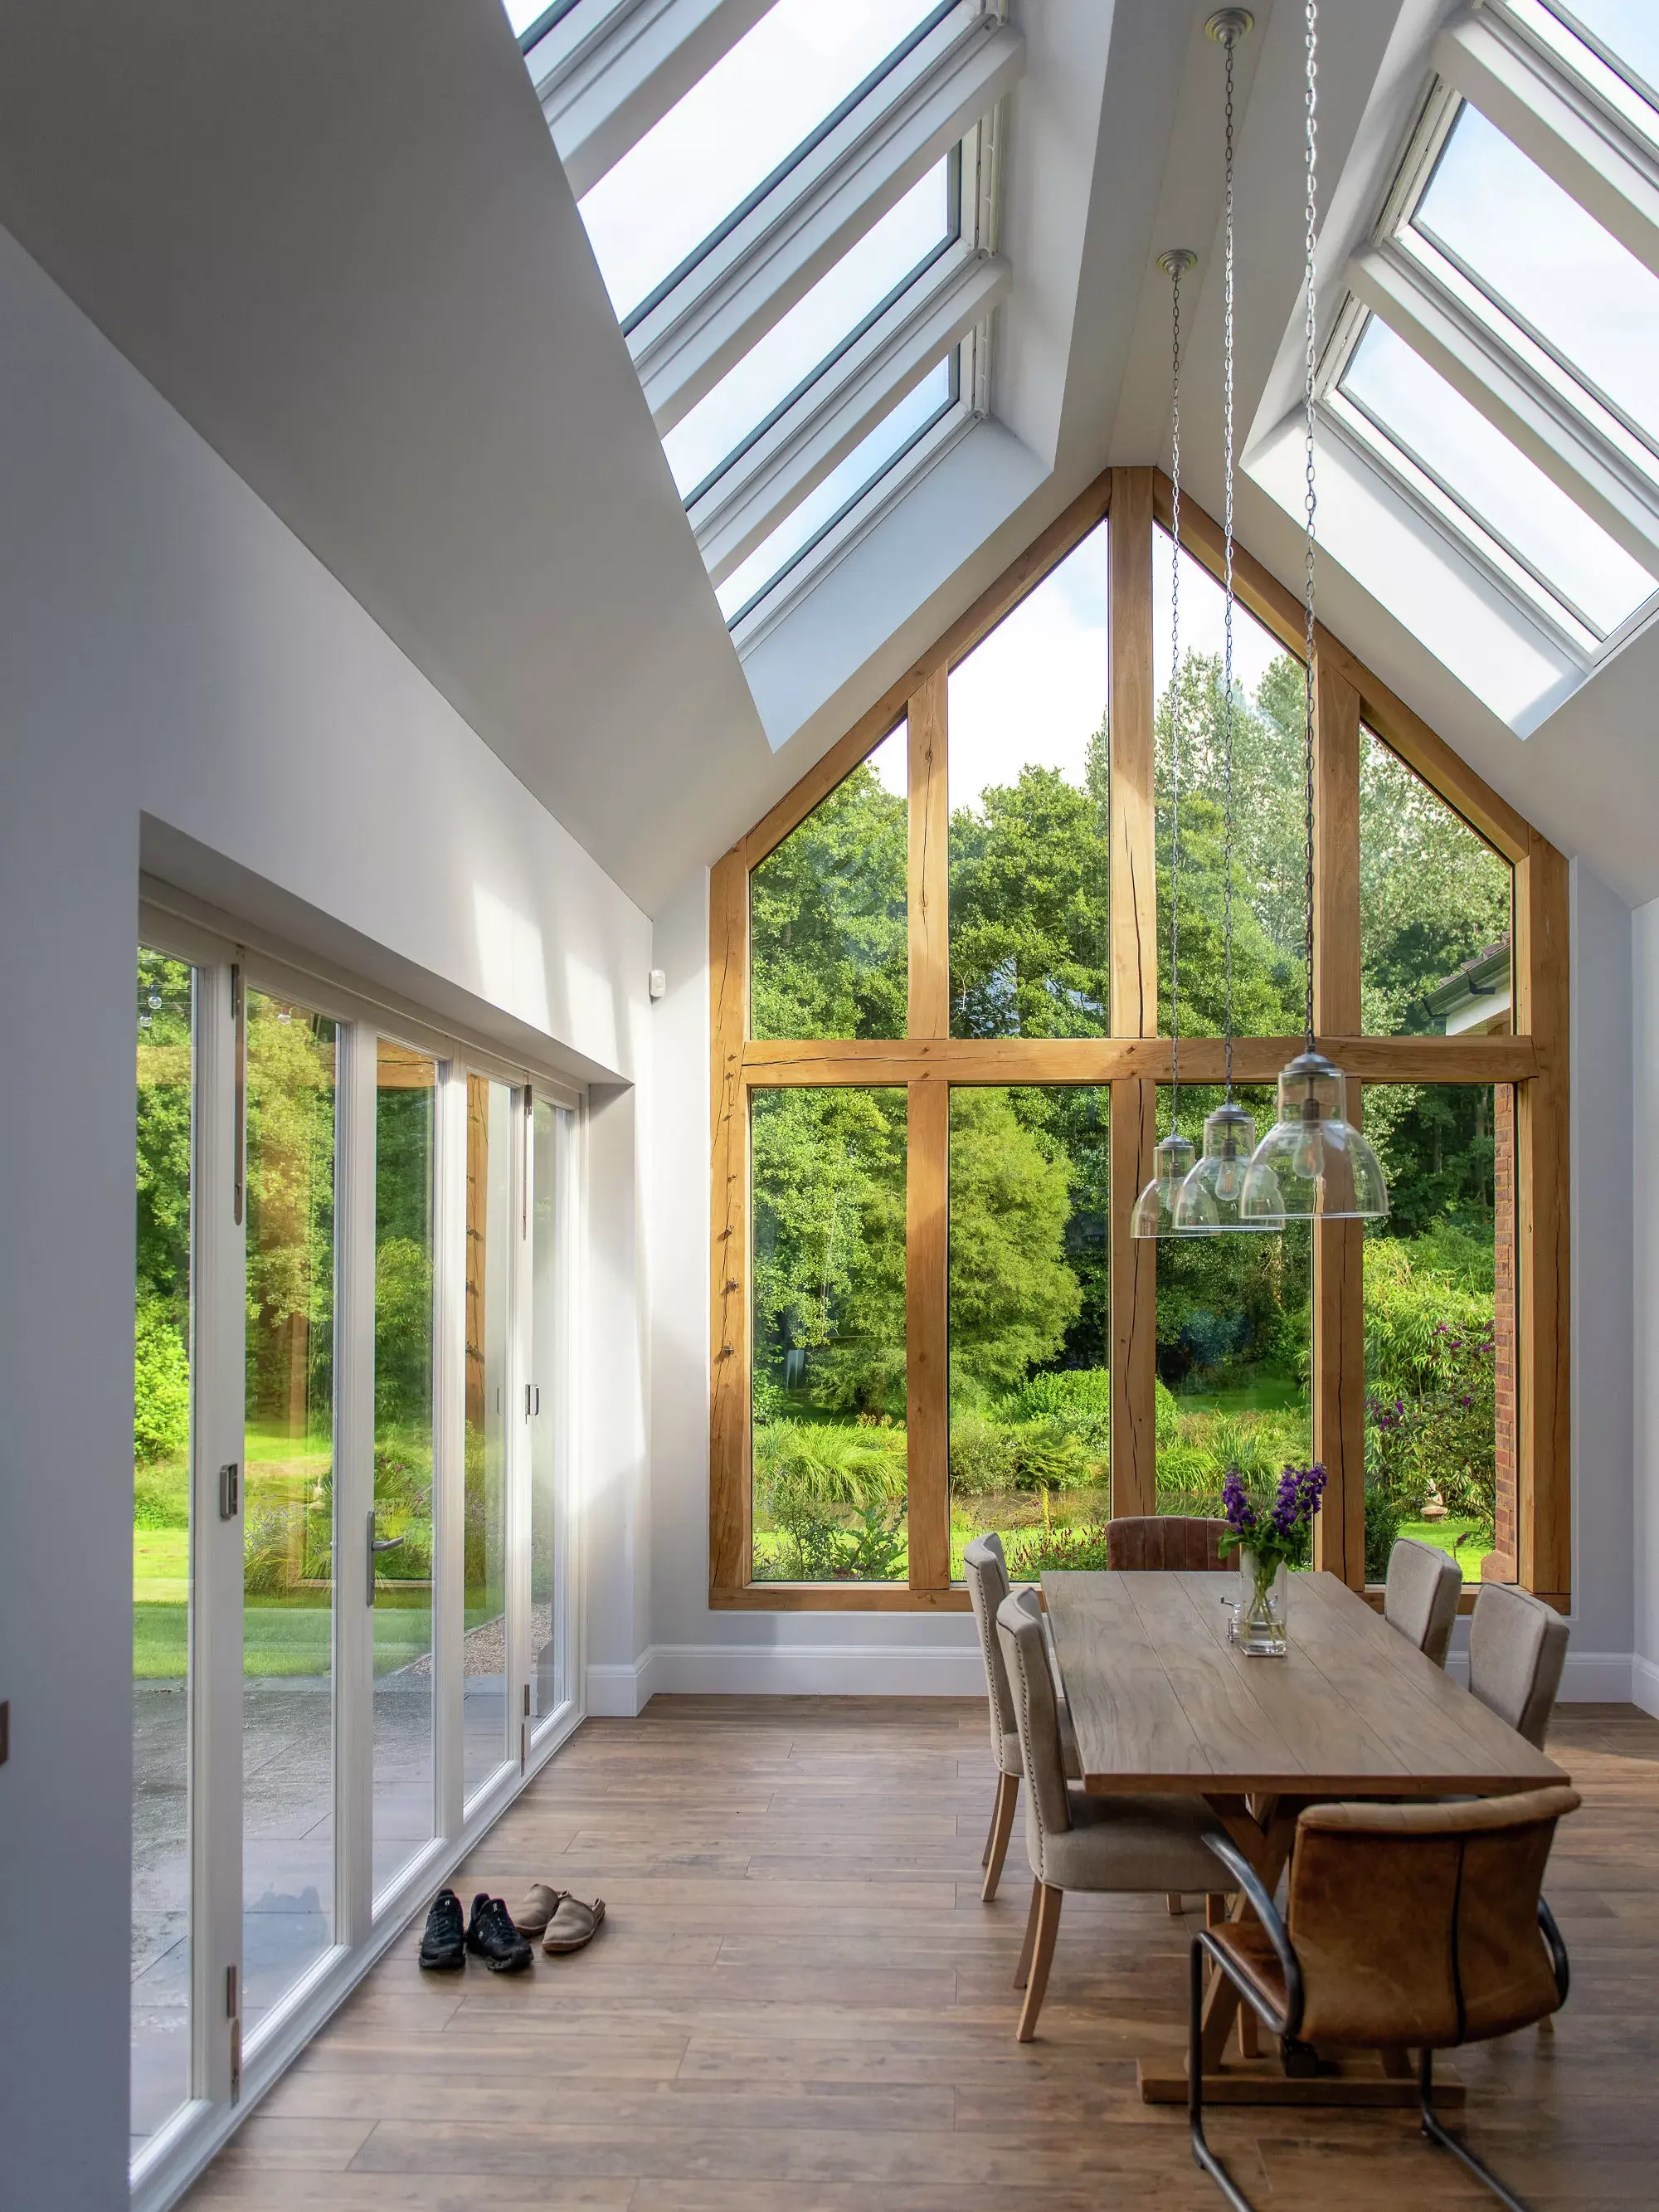 Spacious dining room with VELUX roof windows and a wooden table overlooking greenery.